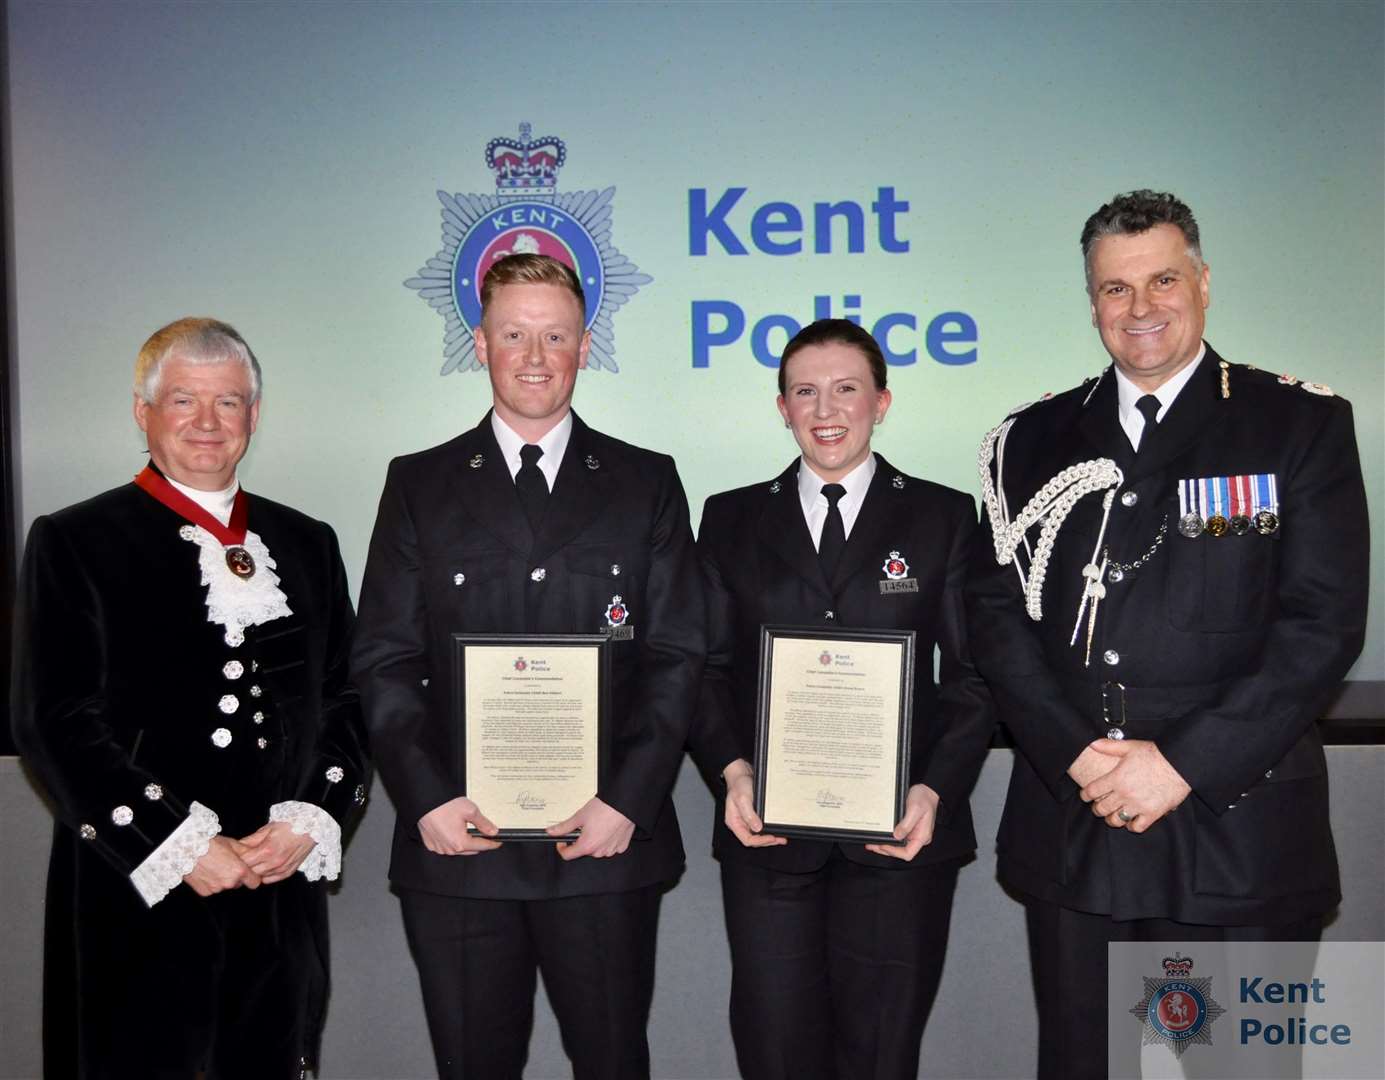 Officers Ben Hibbert and Aimee Bryers receiving their honour at Kent Police College in Maidstone